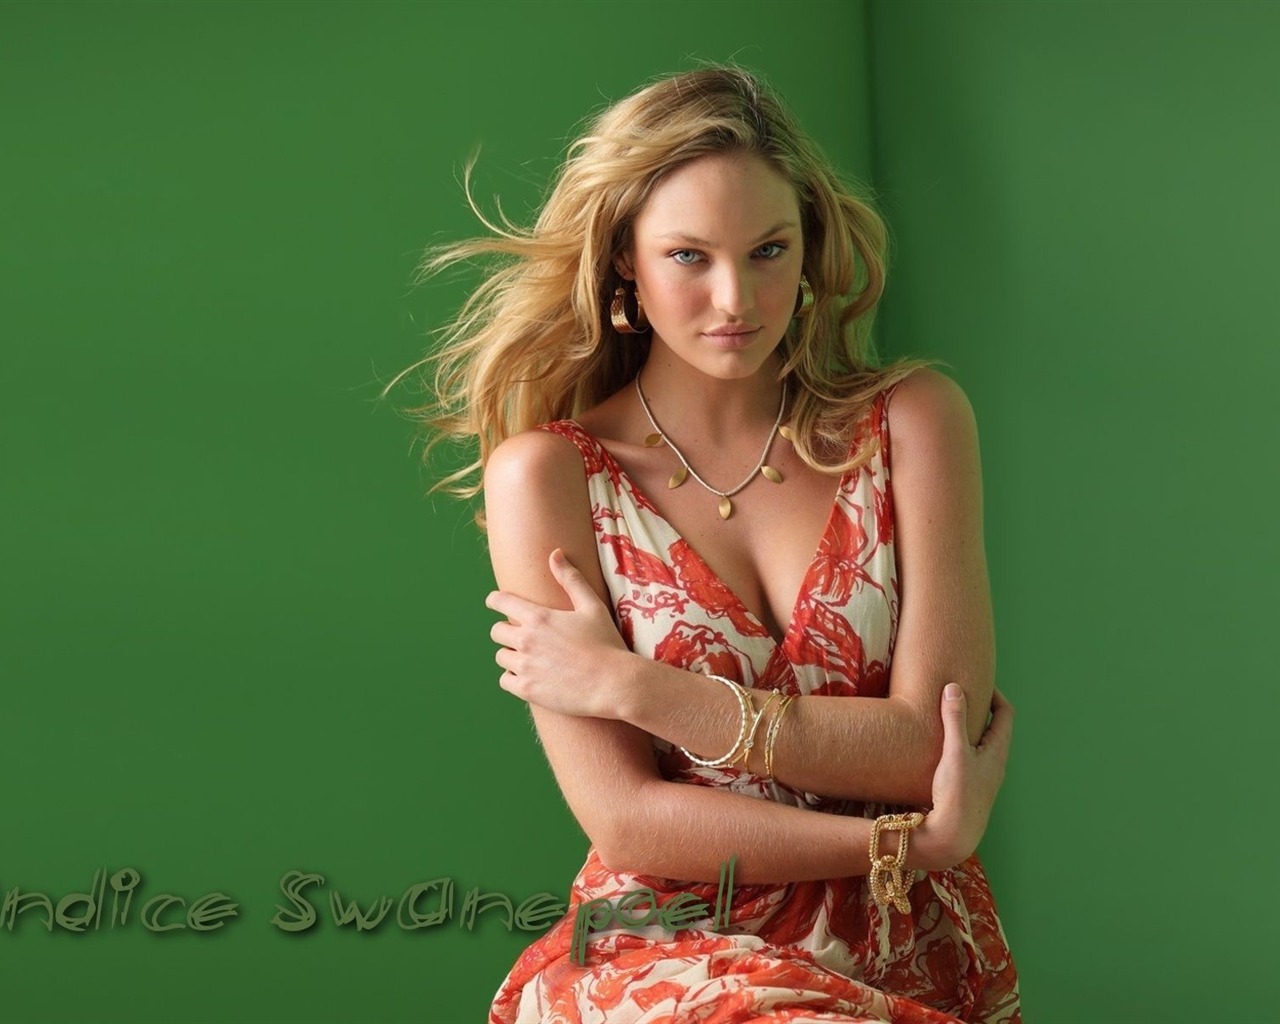 Candice Swanepoel #016 - 1280x1024 Wallpapers Pictures Photos Images